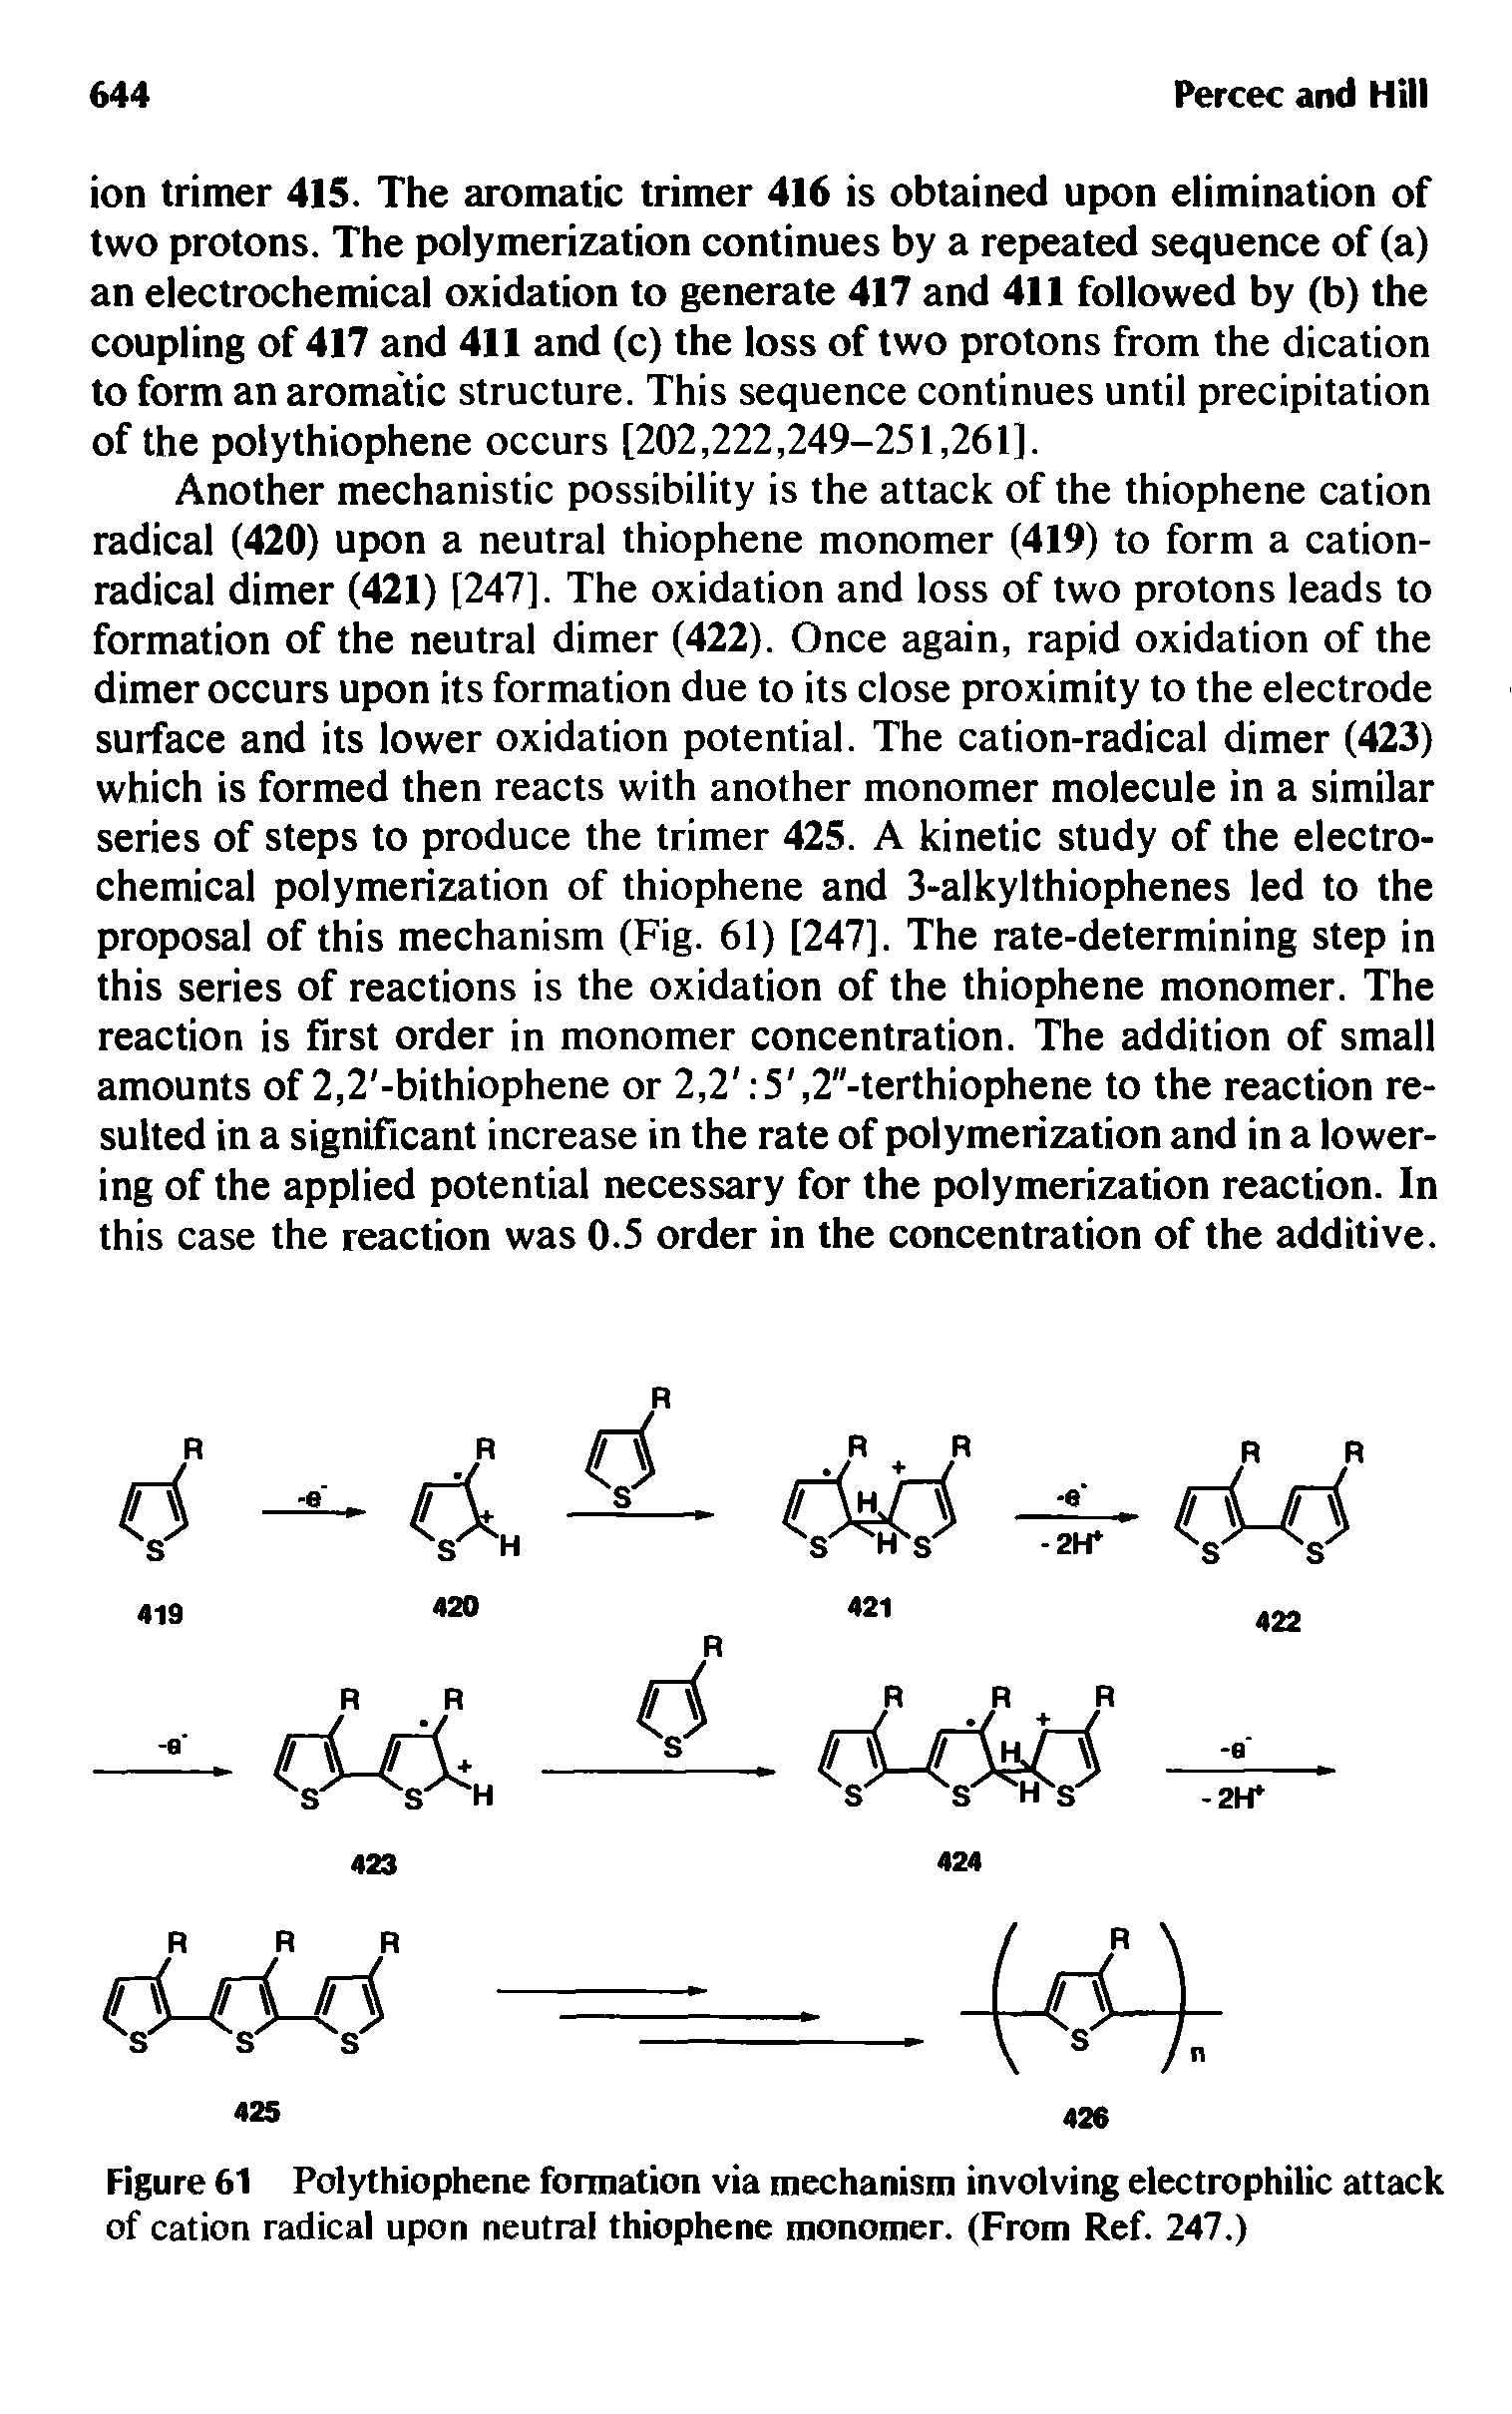 Figure 61 Polythiophene formation via mechanism involving electrophilic attack of cation radical upon neutral thiophene monomer. (From Ref. 247.)...